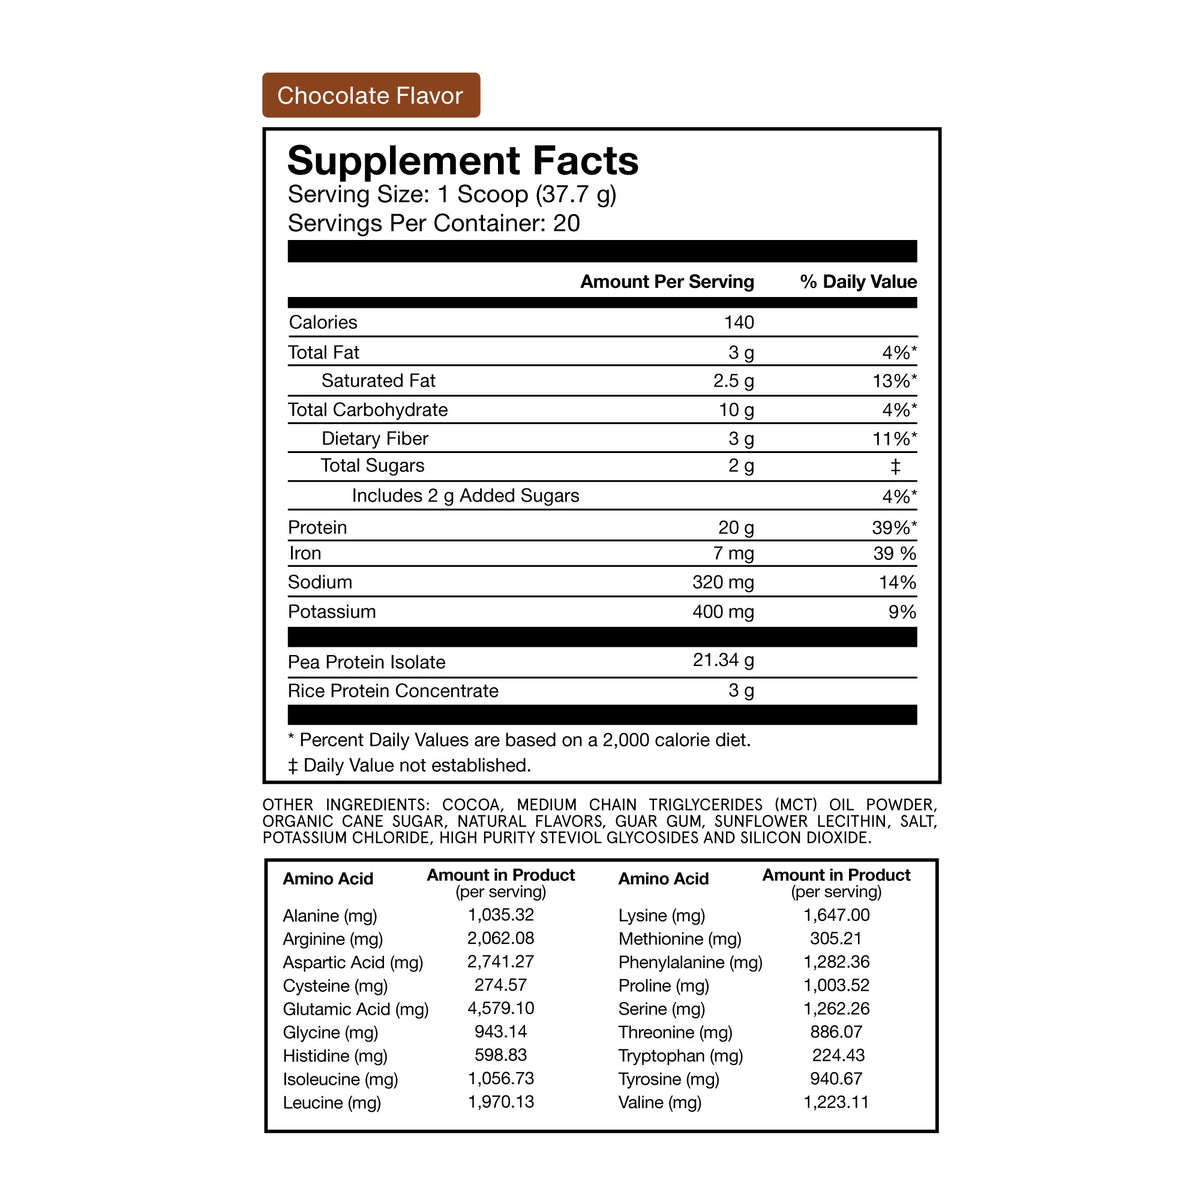 Chocolate Flavored 100% Plant Protein Supplement Facts